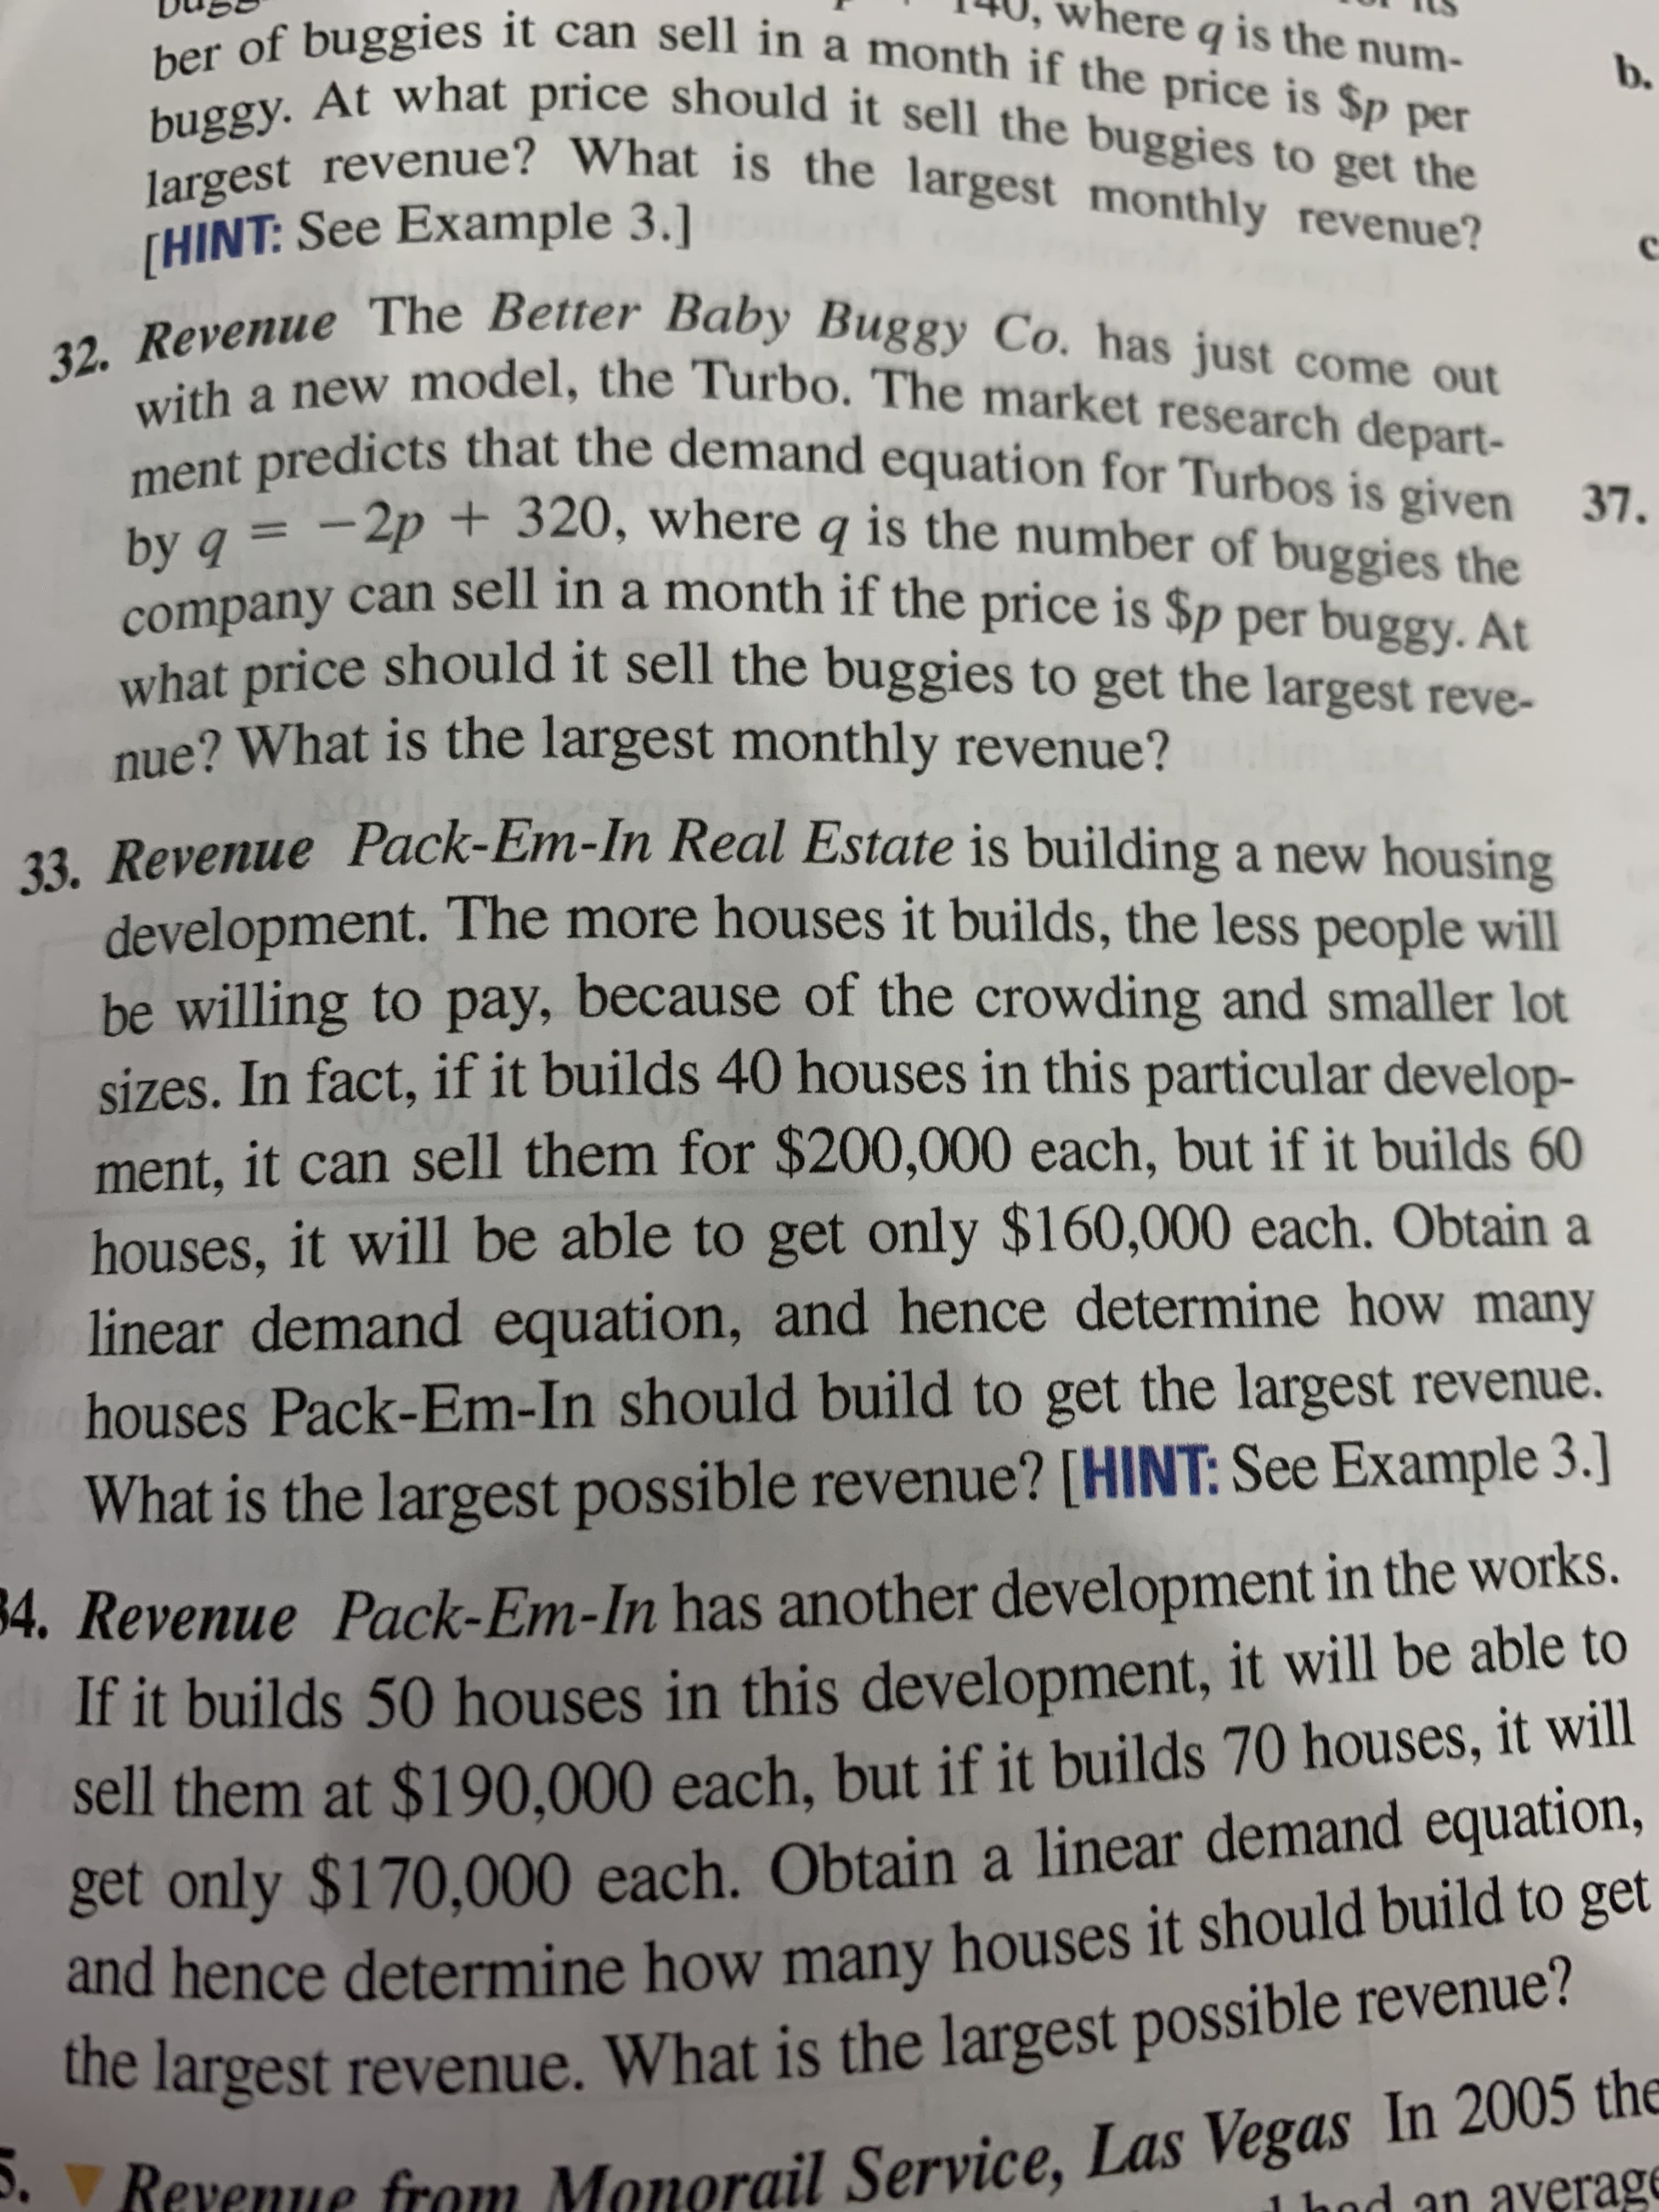 23 Revenue Pack-Em-In Real Estate is building a new housing
development. The more houses it builds, the less people will
be willing to pay, because of the crowding and smaller lot
sizes. In fact, if it builds 40 houses in this particular develop-
ment, it can sell them for $200,000 each, but if it builds 60
houses, it will be able to get only $160,000 each. Obtain a
linear demand equation, and hence determine how many
houses Pack-Em-In should build to get the largest revenue.
What is the largest possible revenue? [HINT: See Example 3.]
